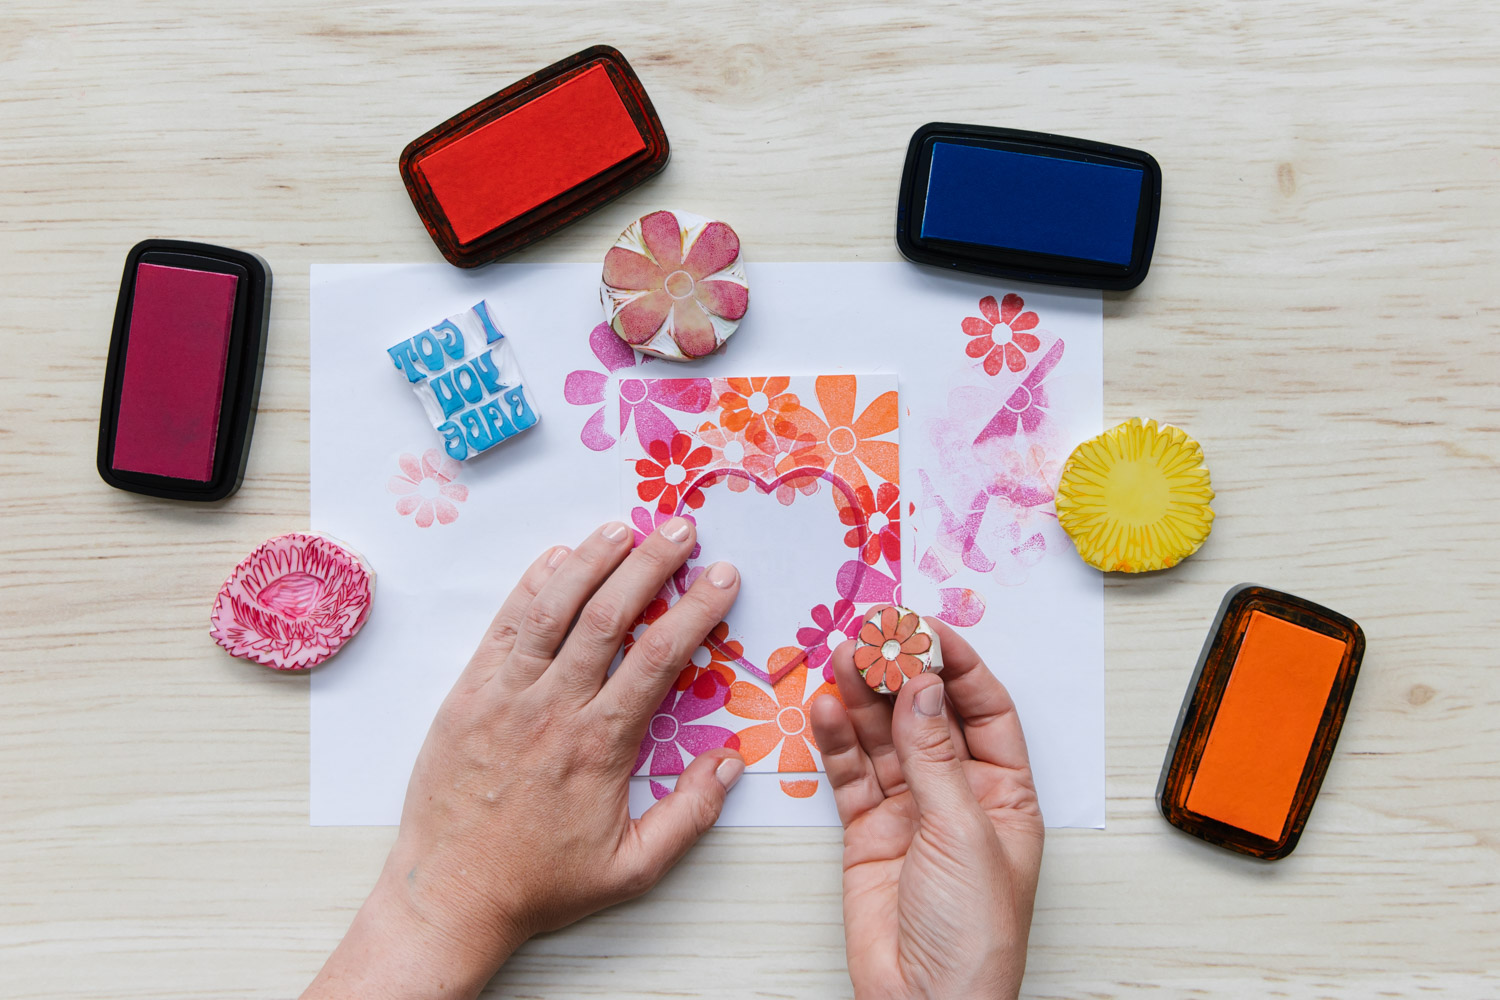 Block printing by hand using stamp inks to create a gift card design